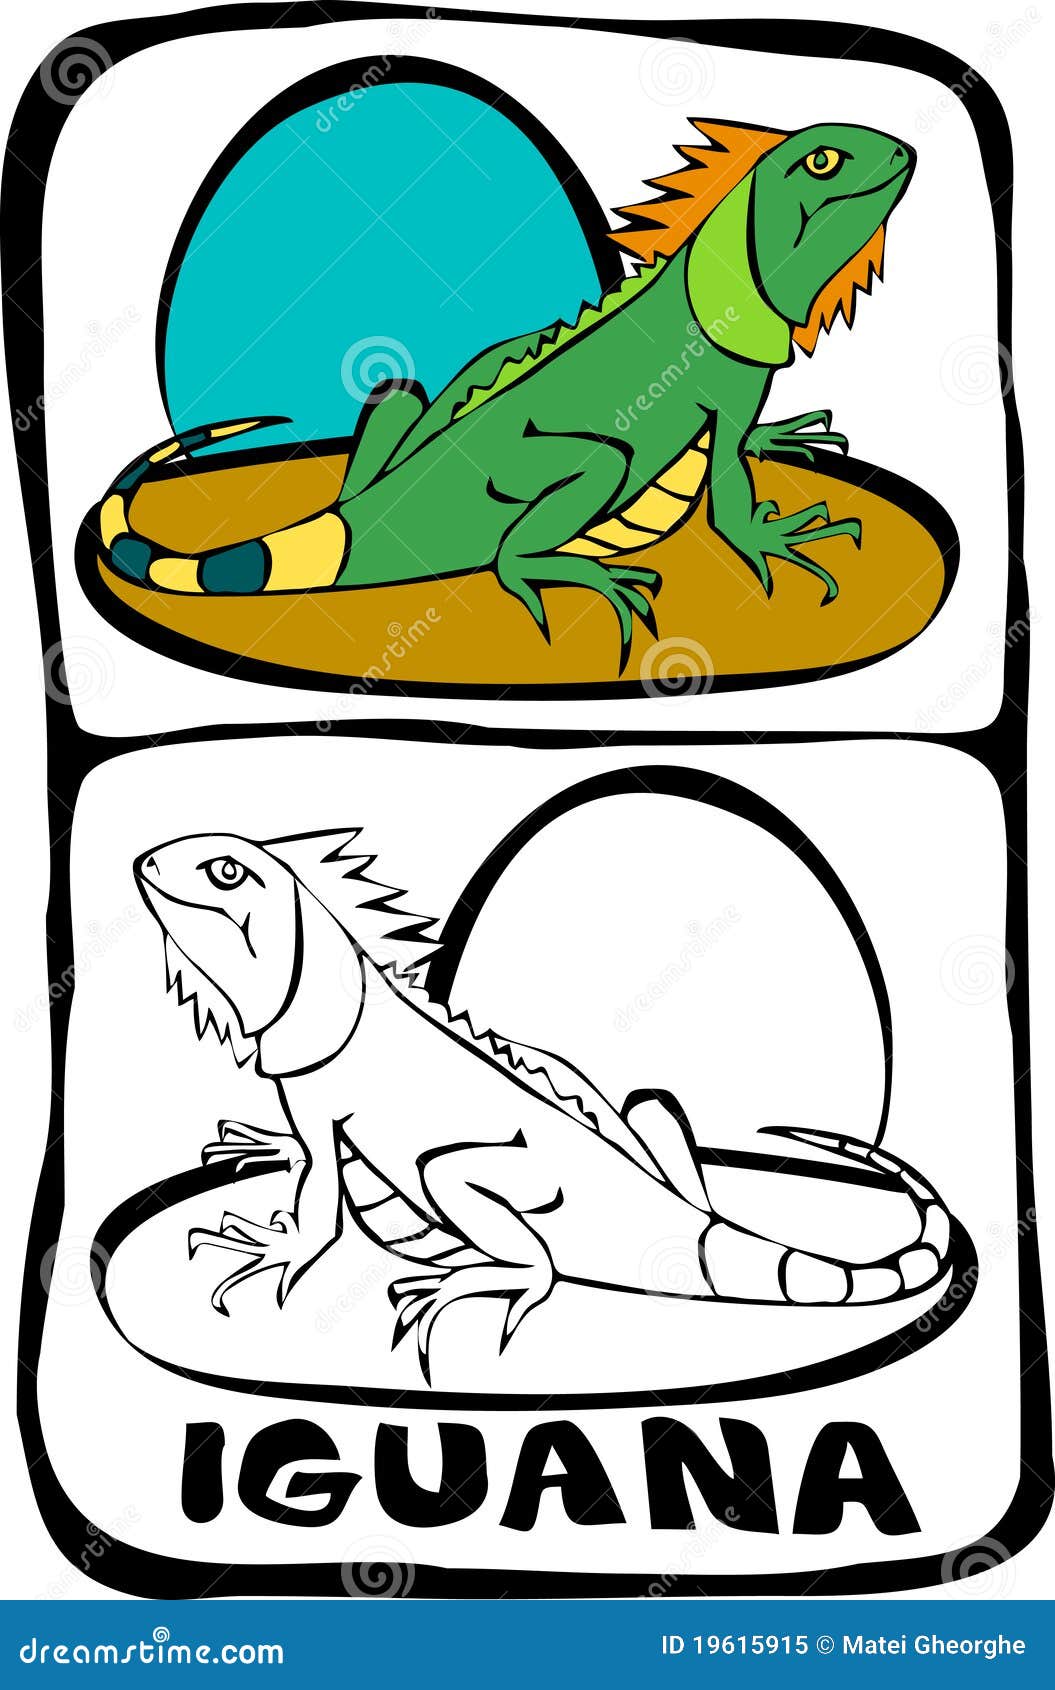 Download Coloring Book Page : Iguana Stock Illustration - Image ...